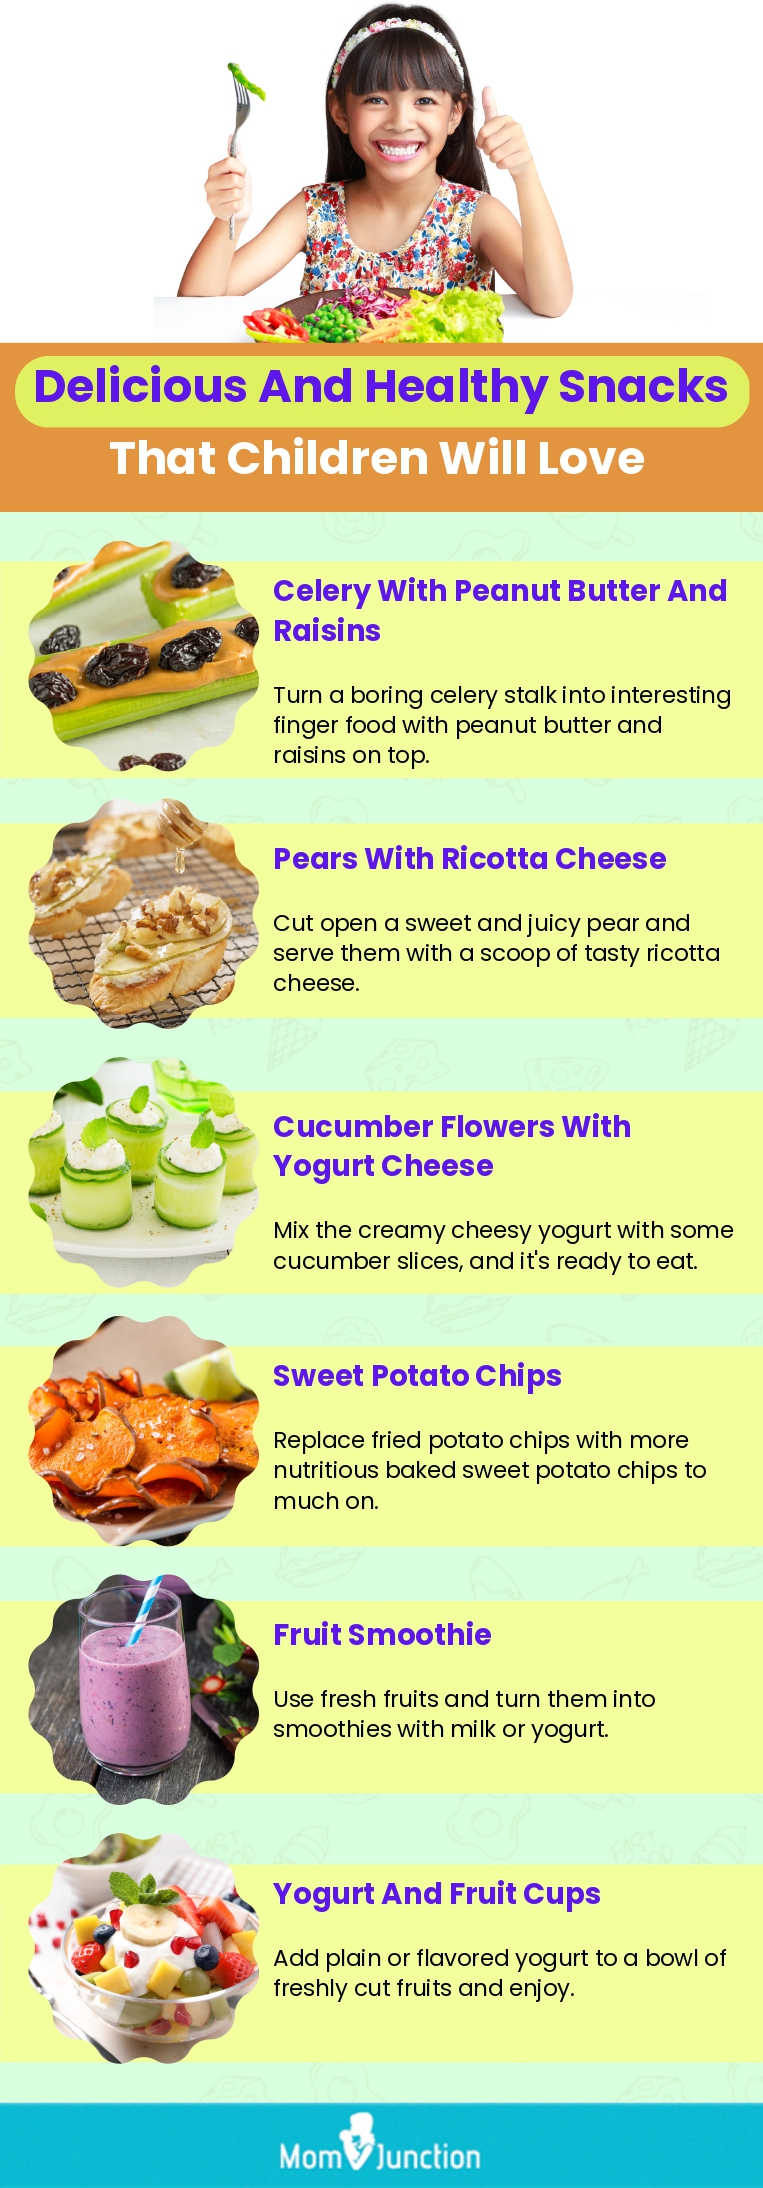 delicious and healthy snacks that children will love (infographic)